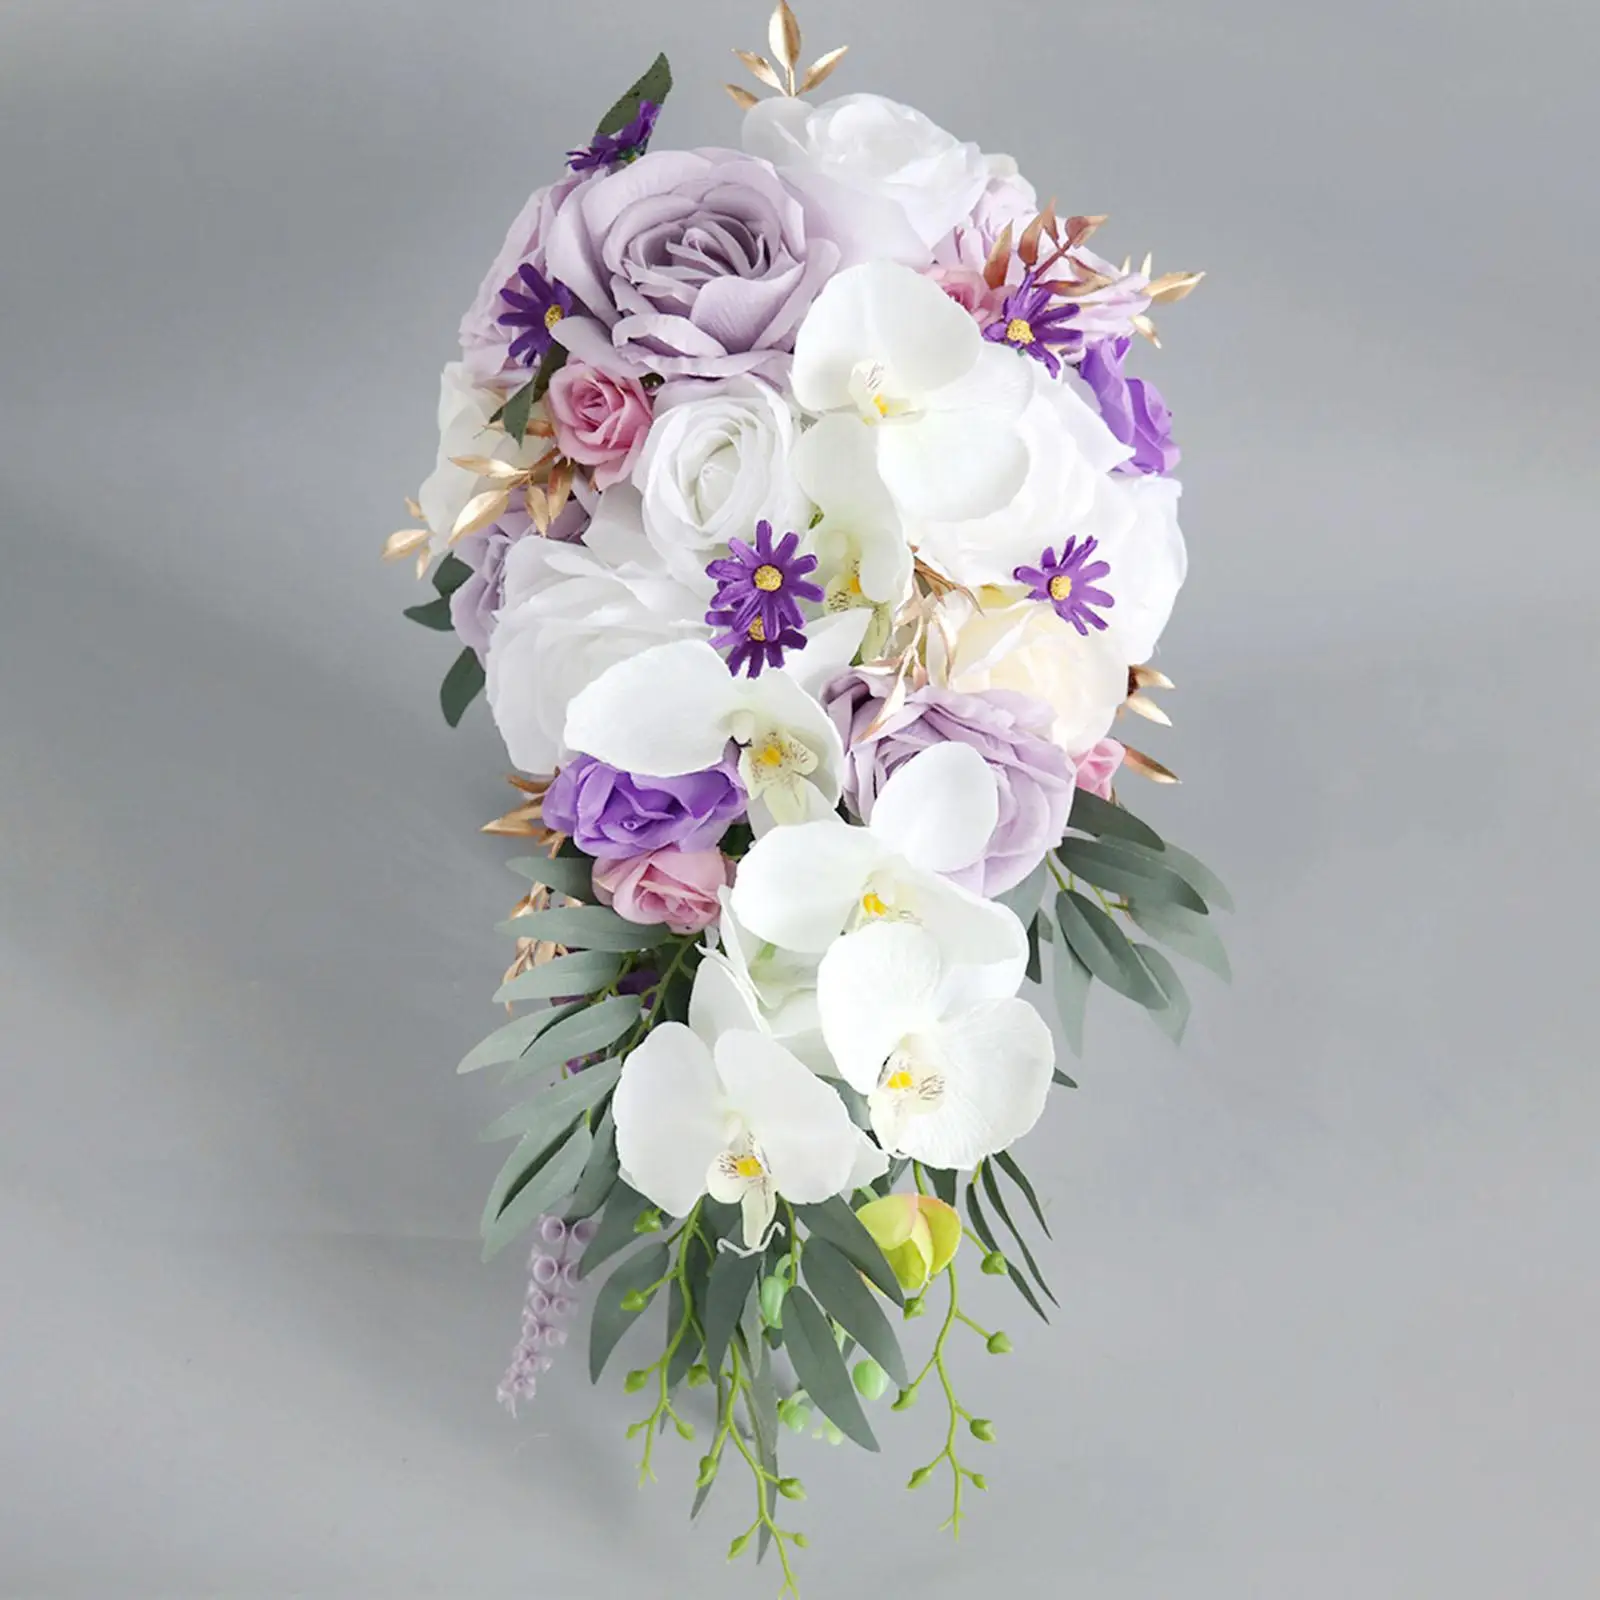 Bride Holding Flowers Wedding Bouquets for Ceremony Anniversary Decorations